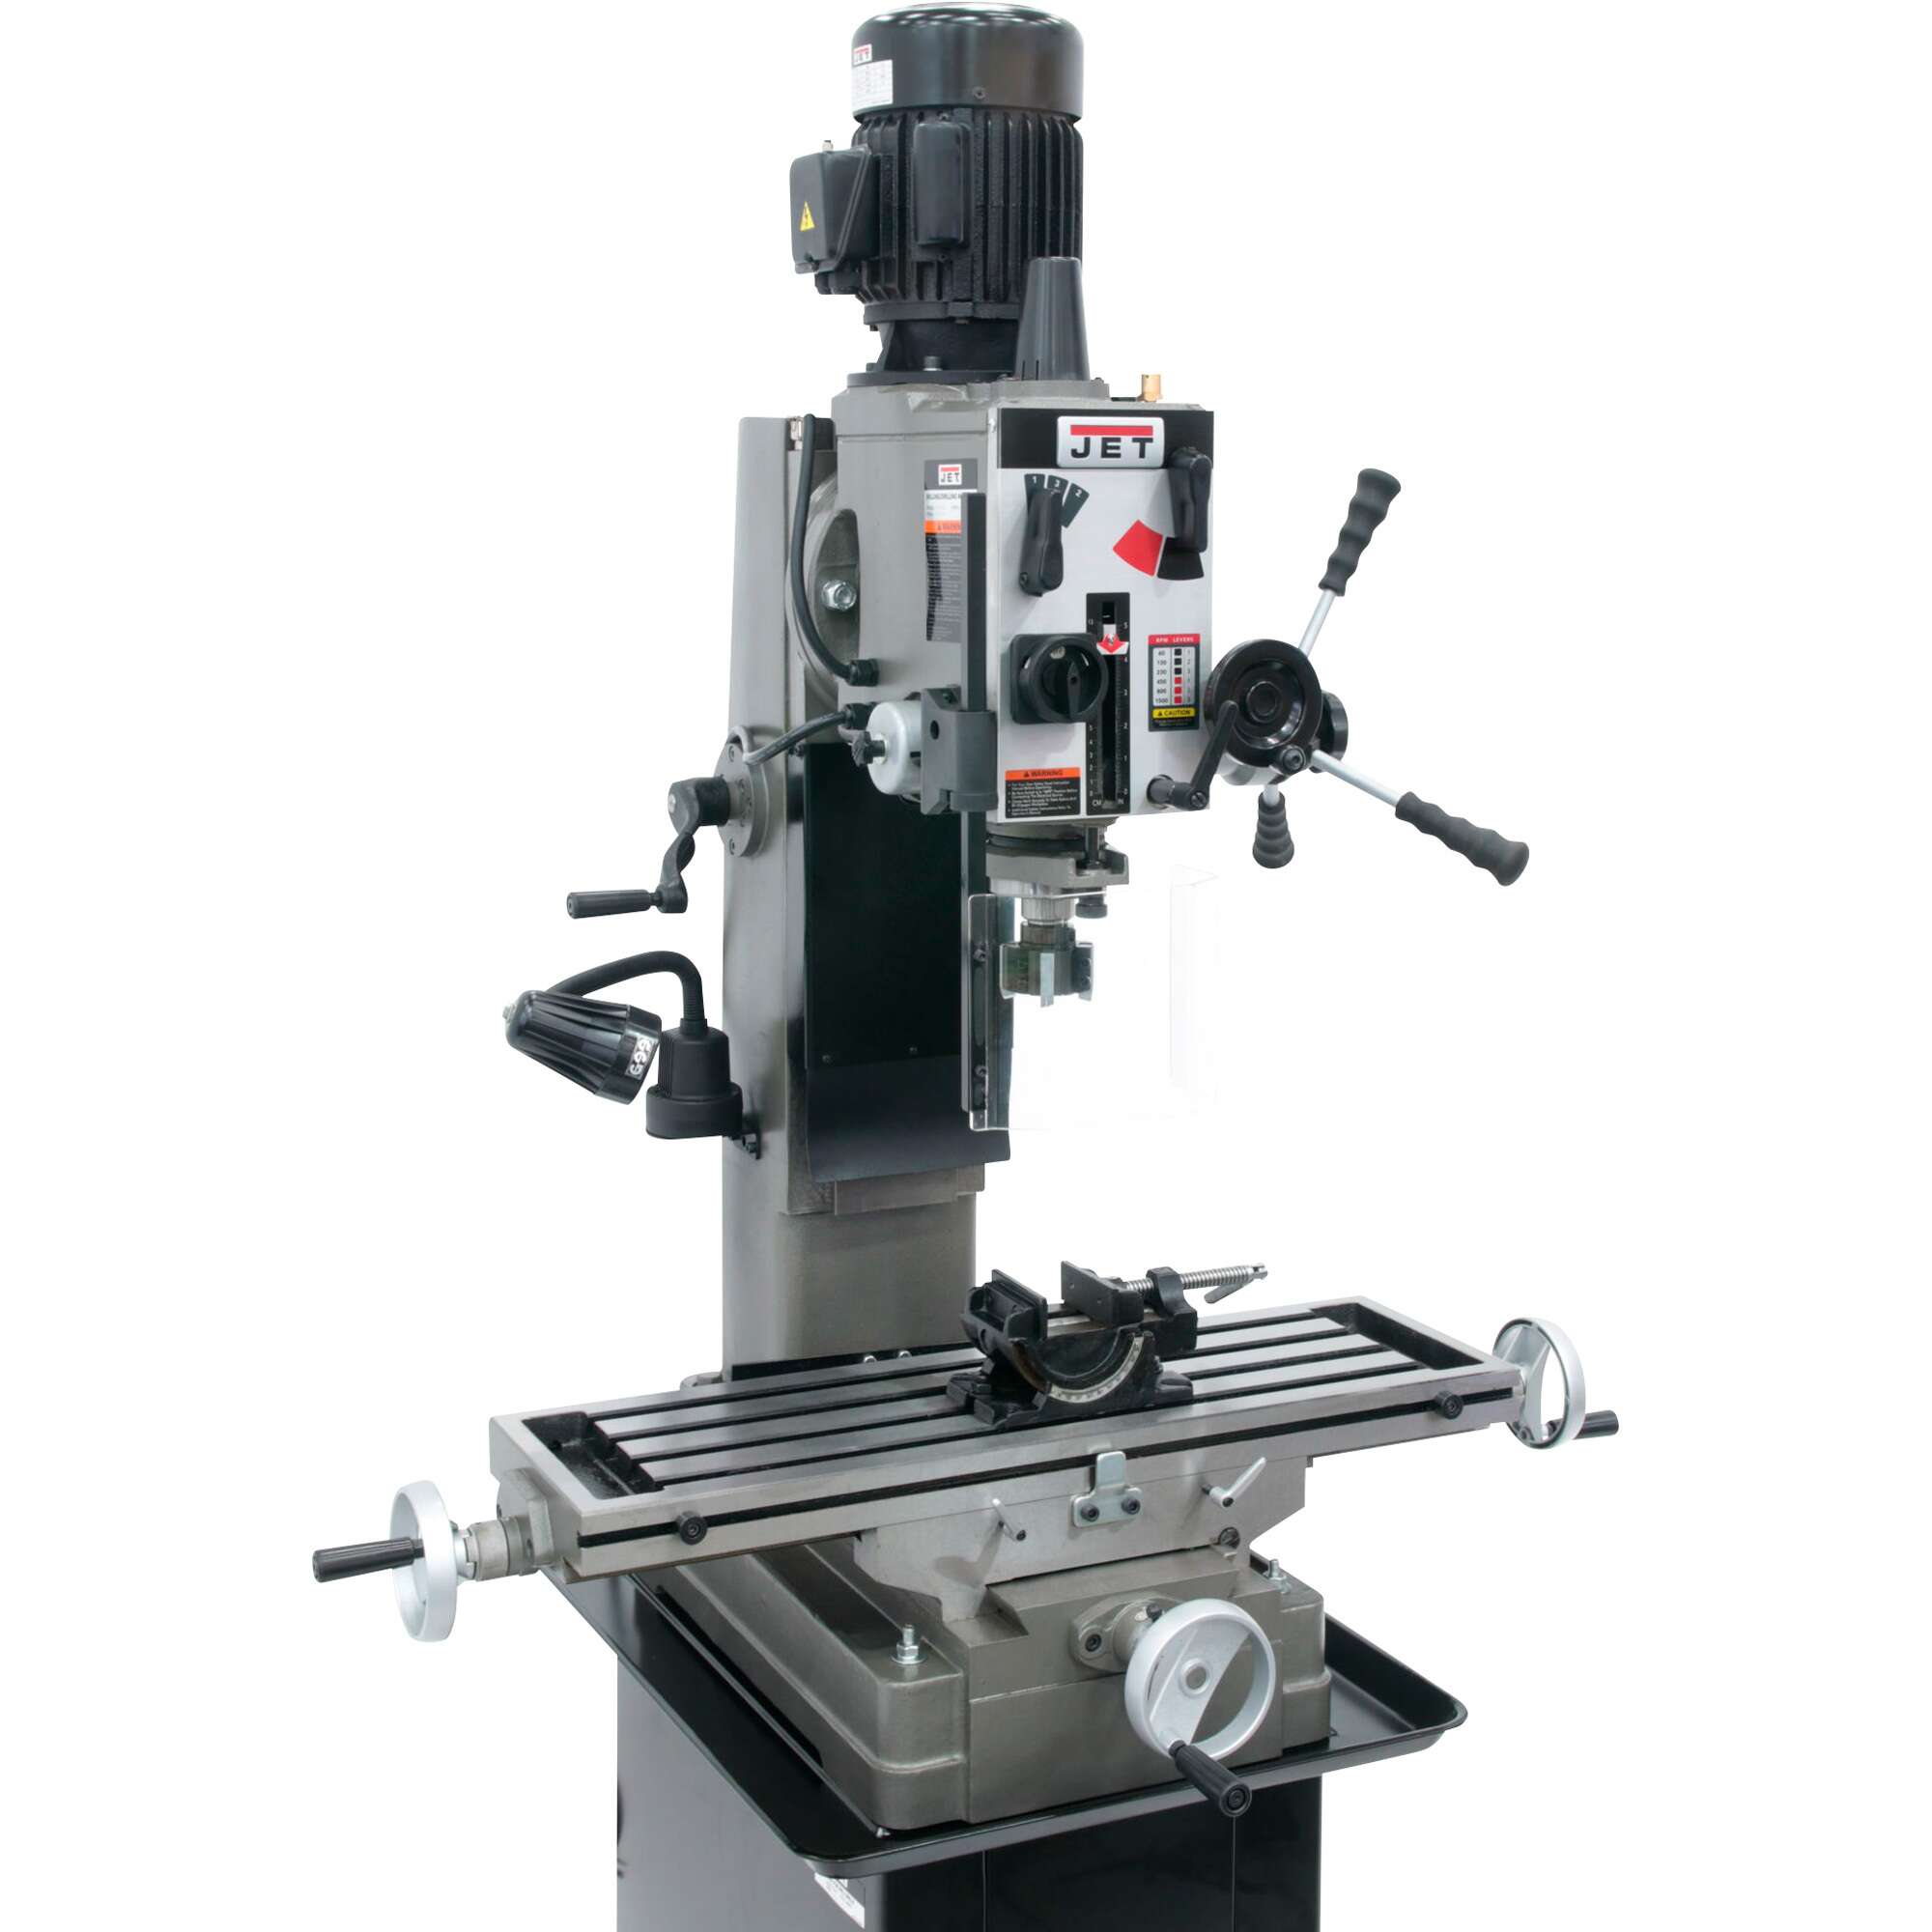 JET Geared Head Square Column Mill Drill with Newall DP 500 2 Axis DRO and X Powerfeed 1 1 2 HP 115 230V